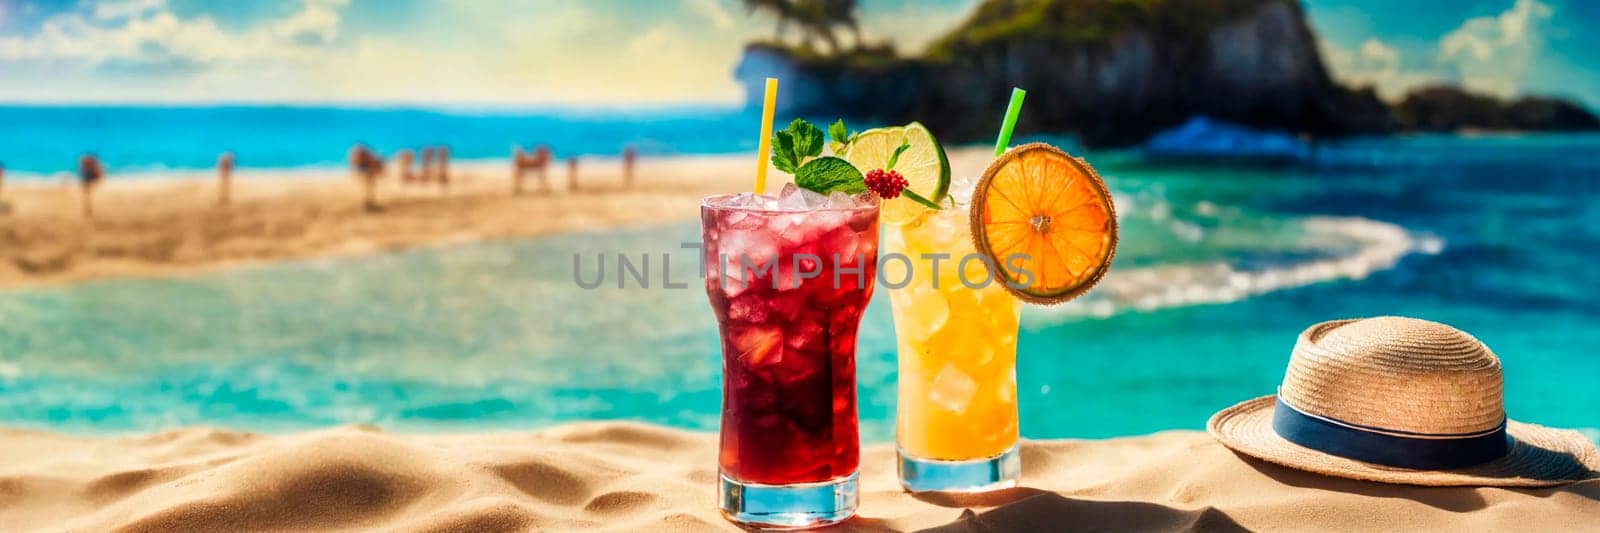 cocktails on the seashore overlooking palm trees. Selective focus. drink.